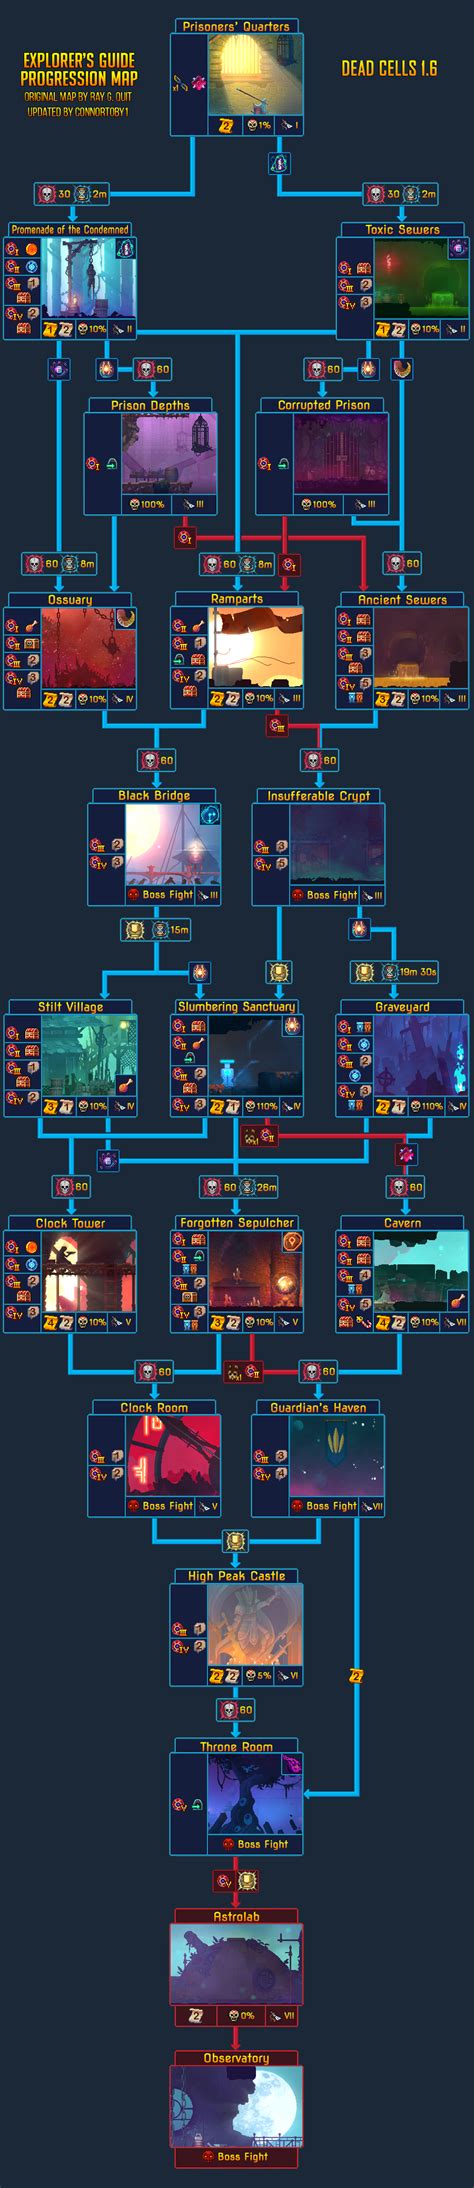 How To Get To Graveyard Dead Cells Home Collection